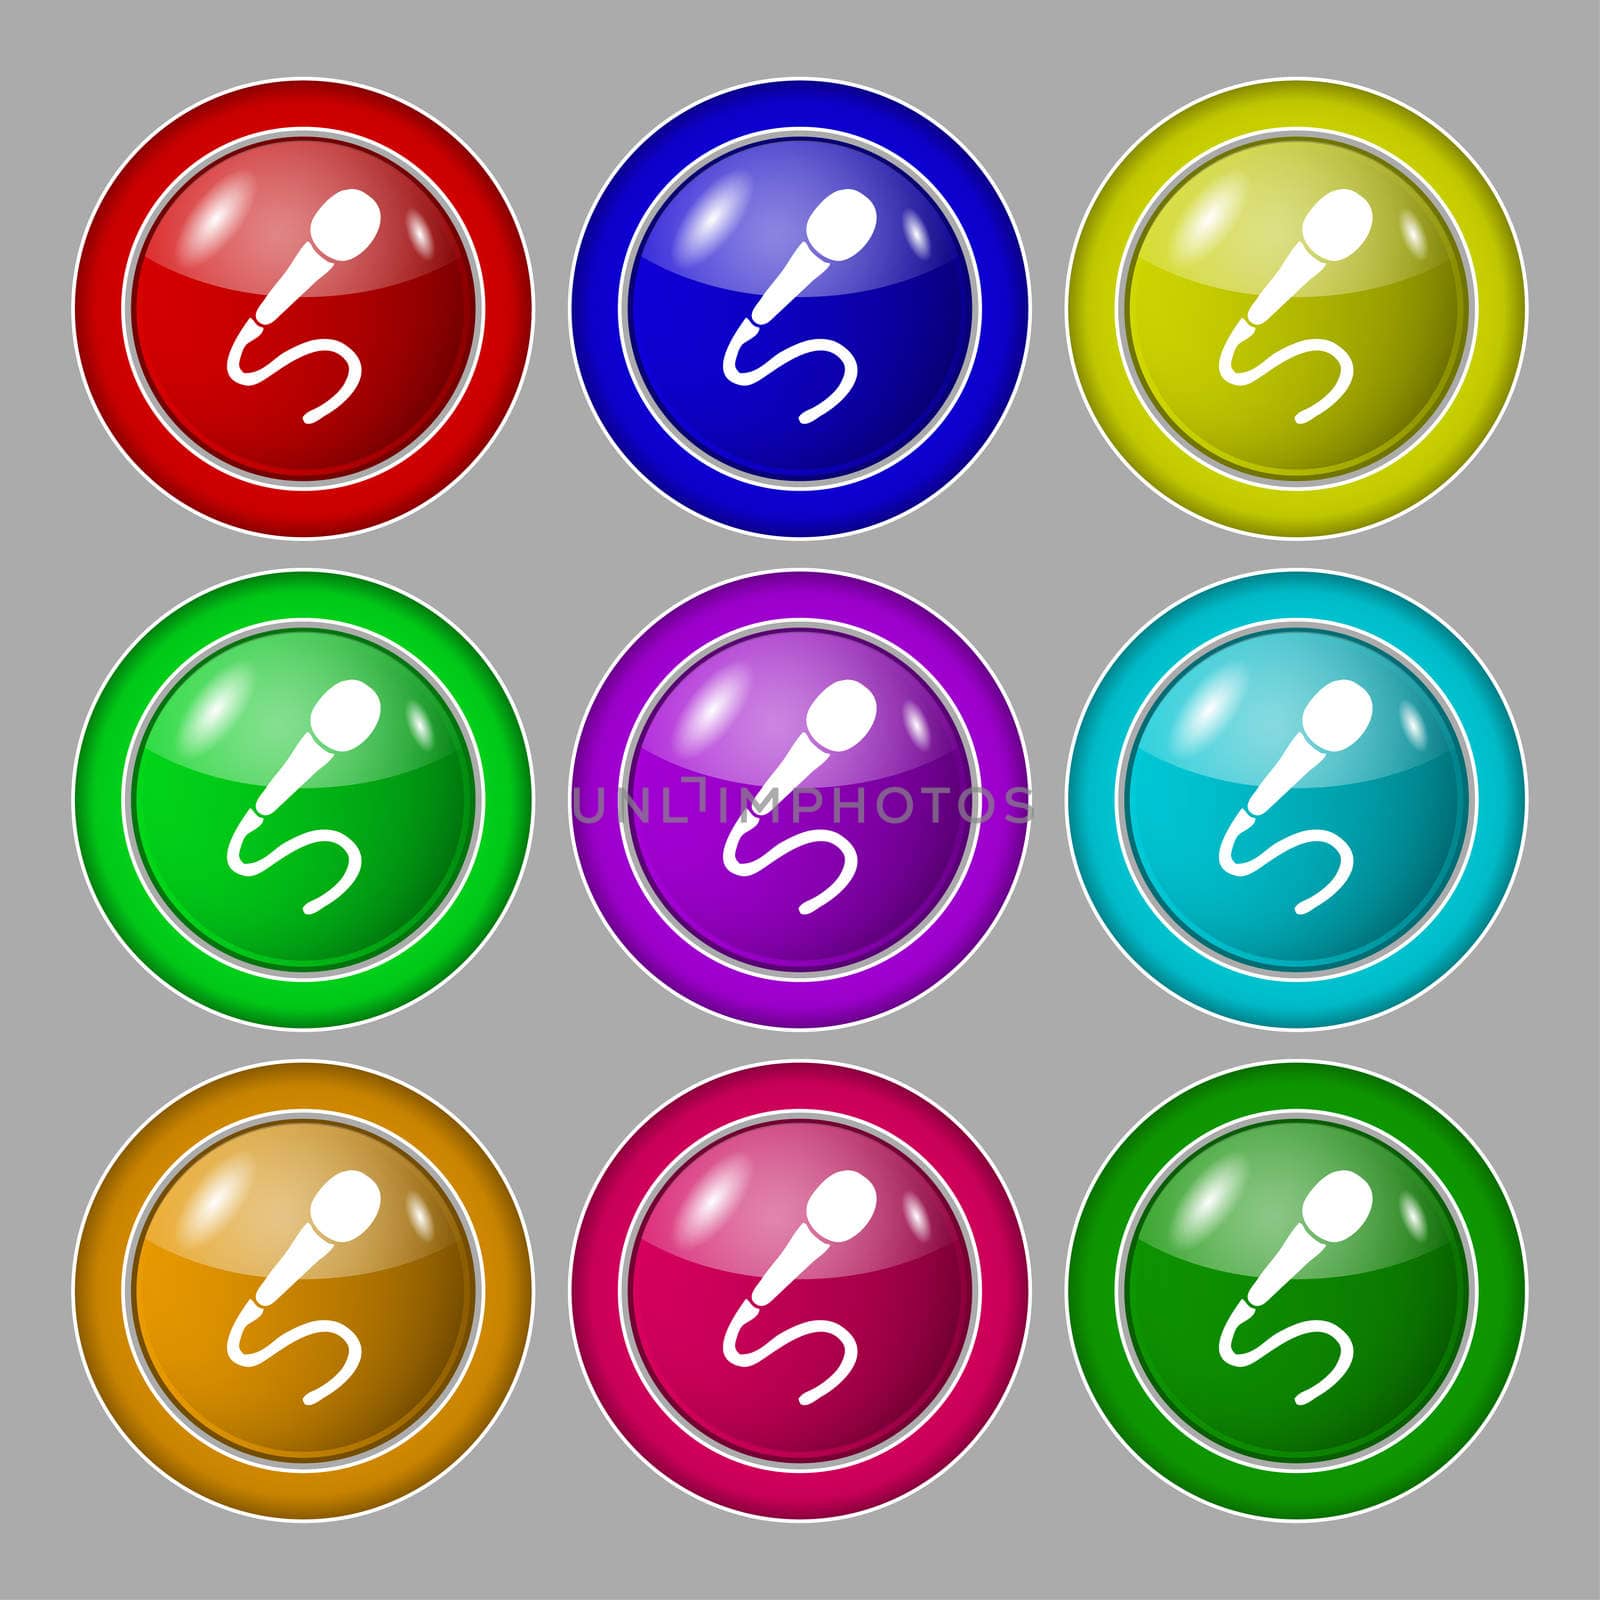 microphone icon sign. symbol on nine round colourful buttons. illustration